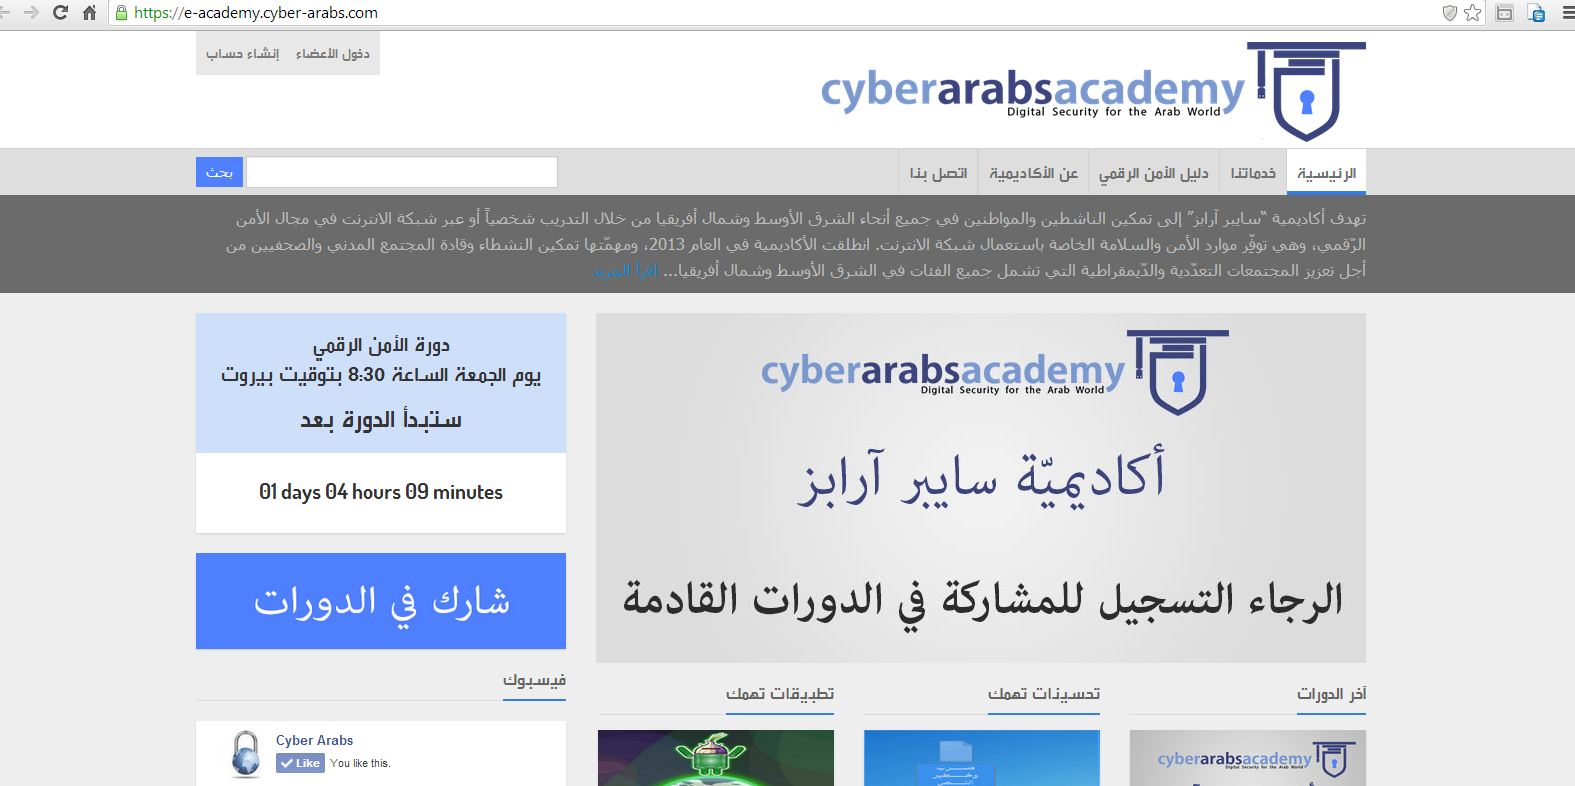 The home page of the Cyber Arabs Online Academy